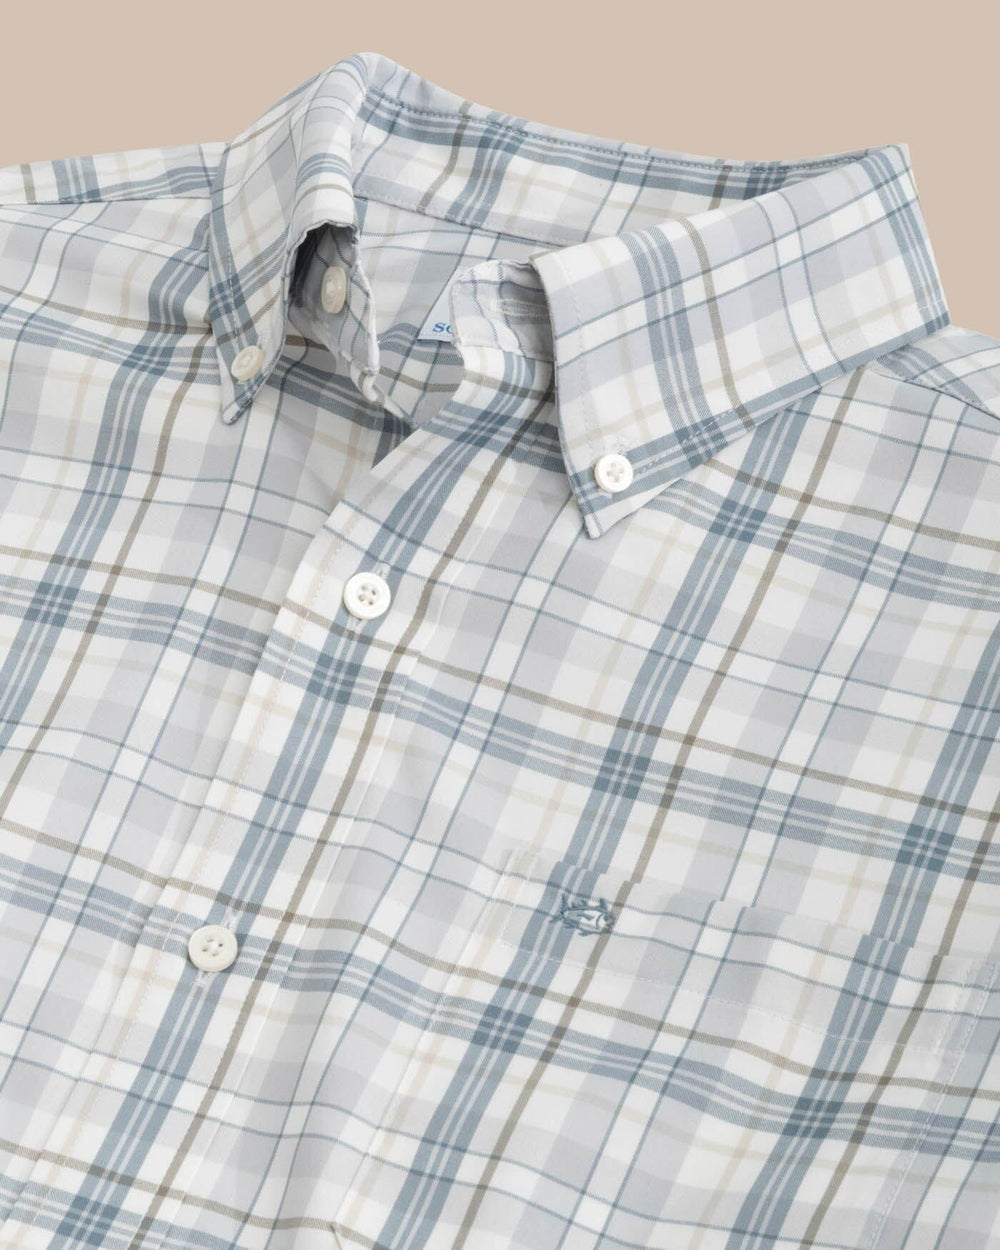 The detail view of the Southern Tide Highsmith Plaid Sport Shirt by Southern Tide - Platinum Grey